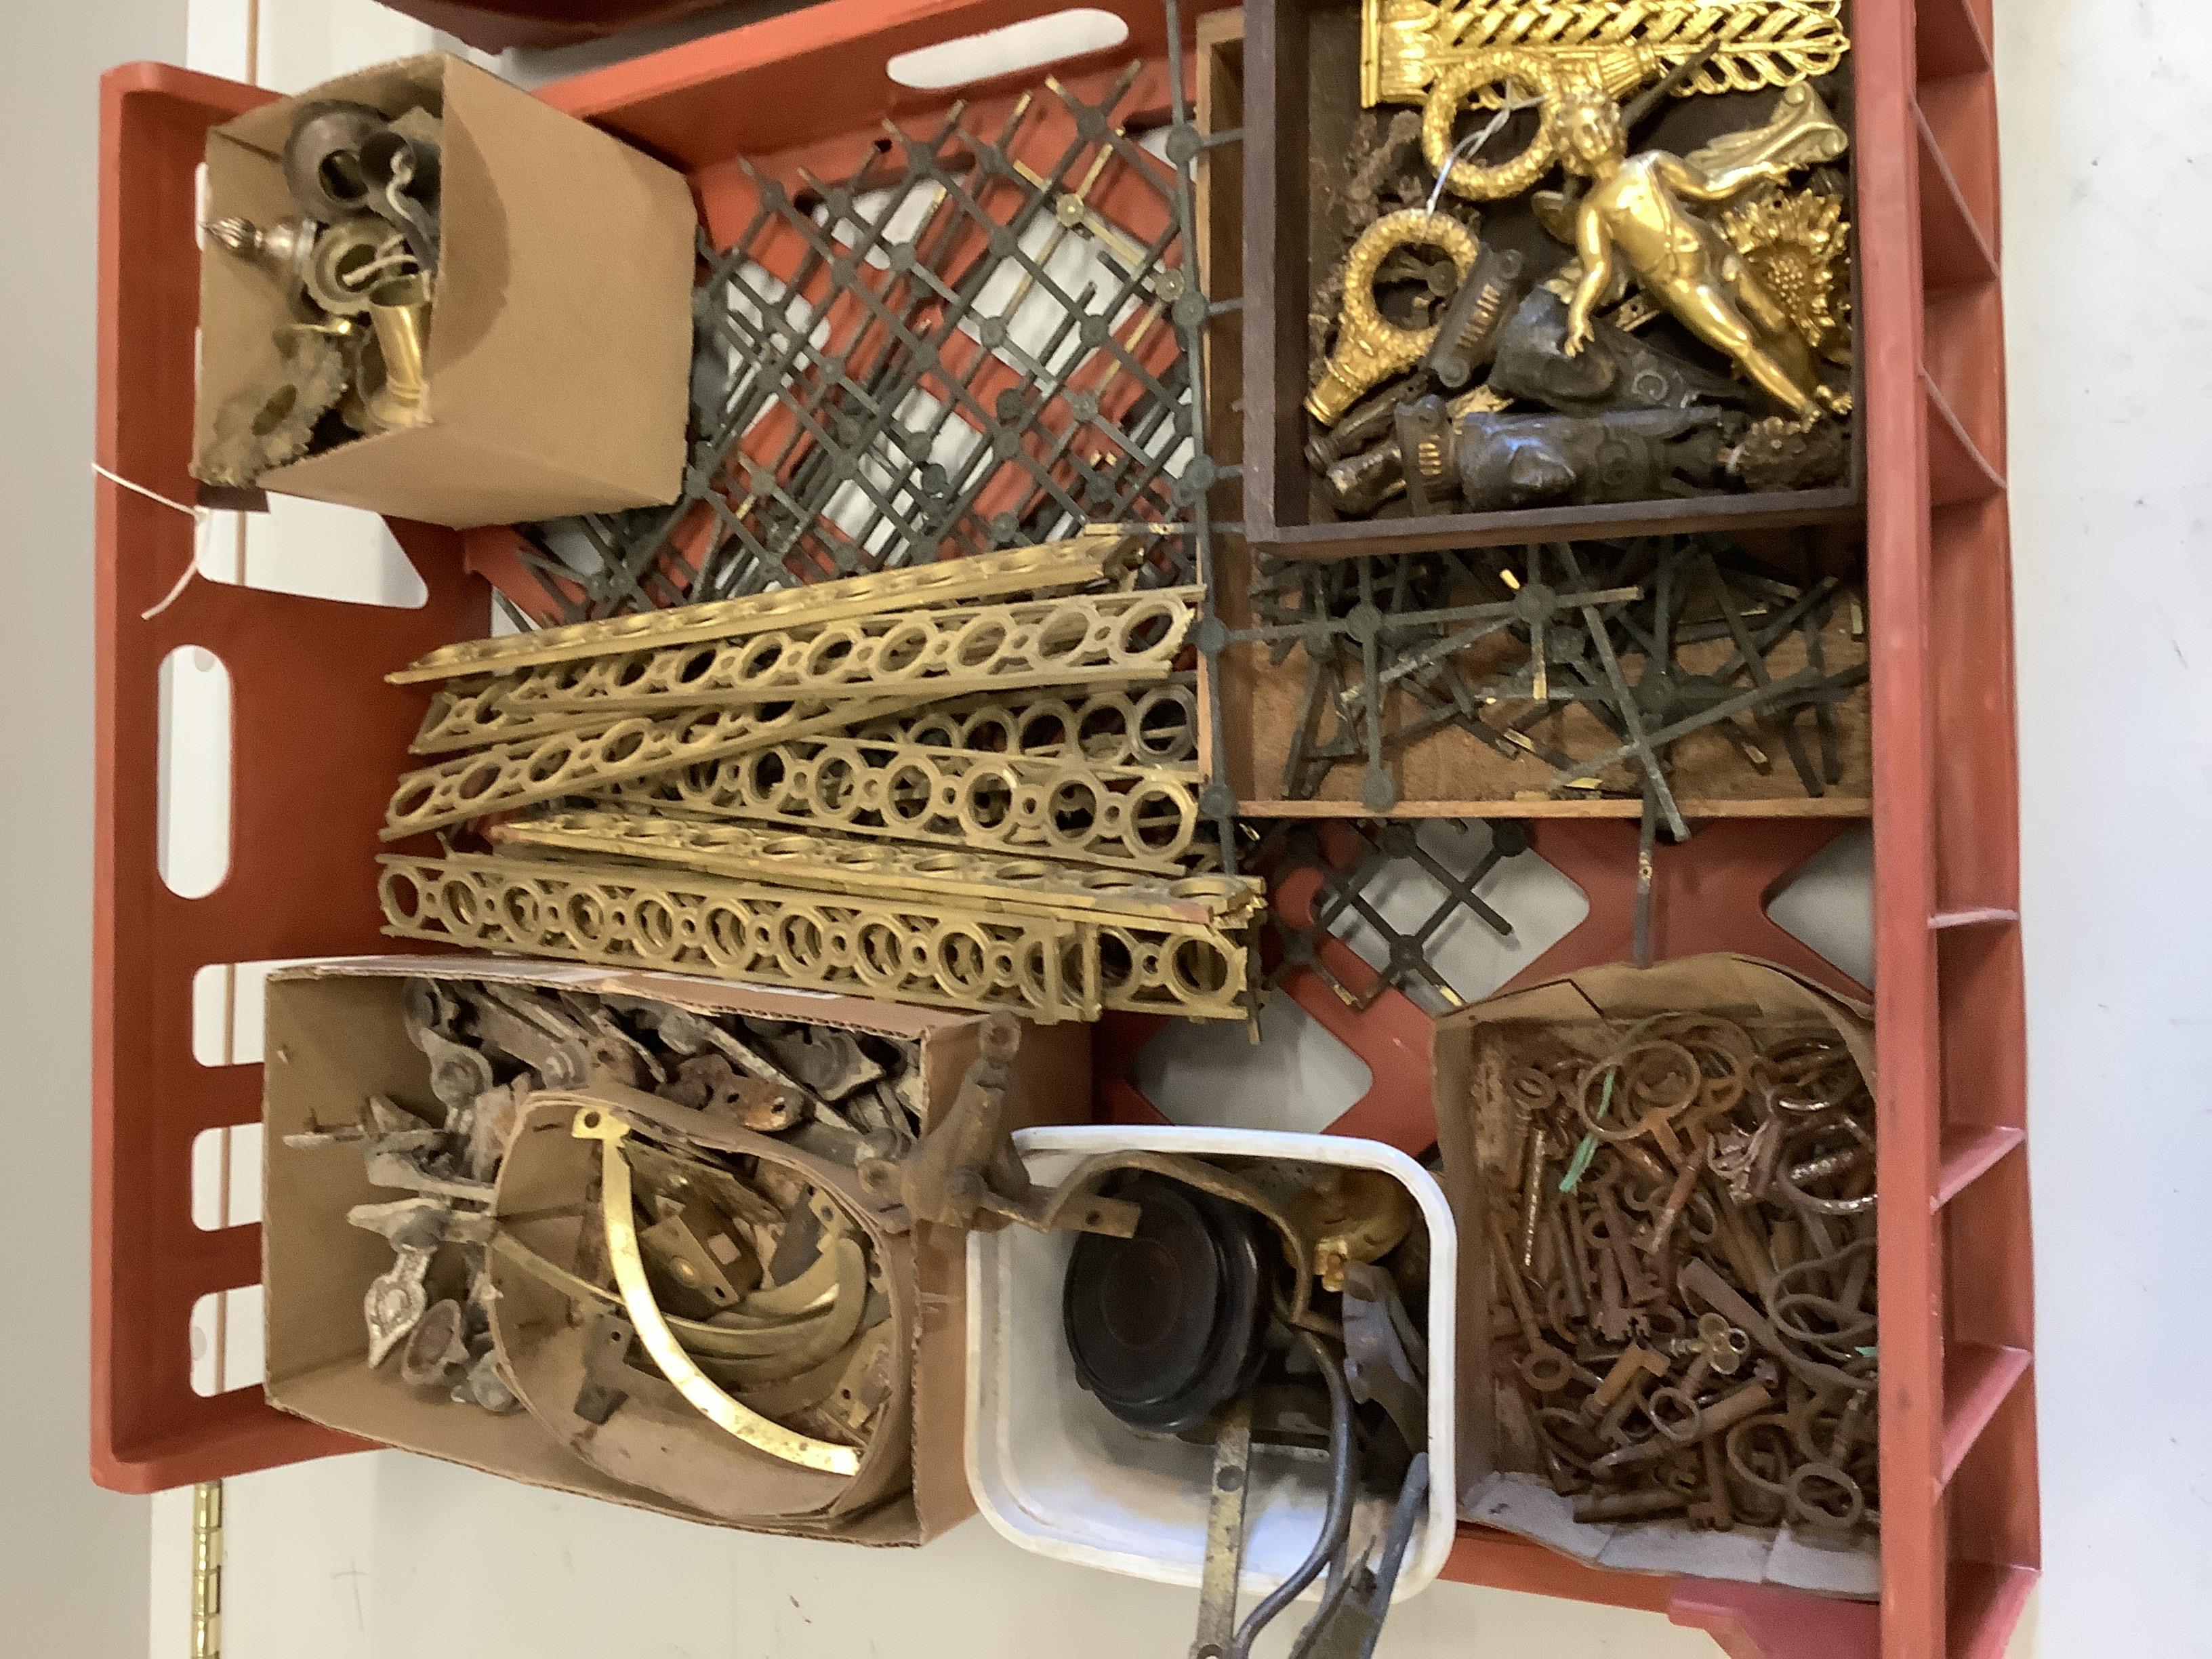 A quantity of assorted furniture mounts, handles locks and fittings, etc.